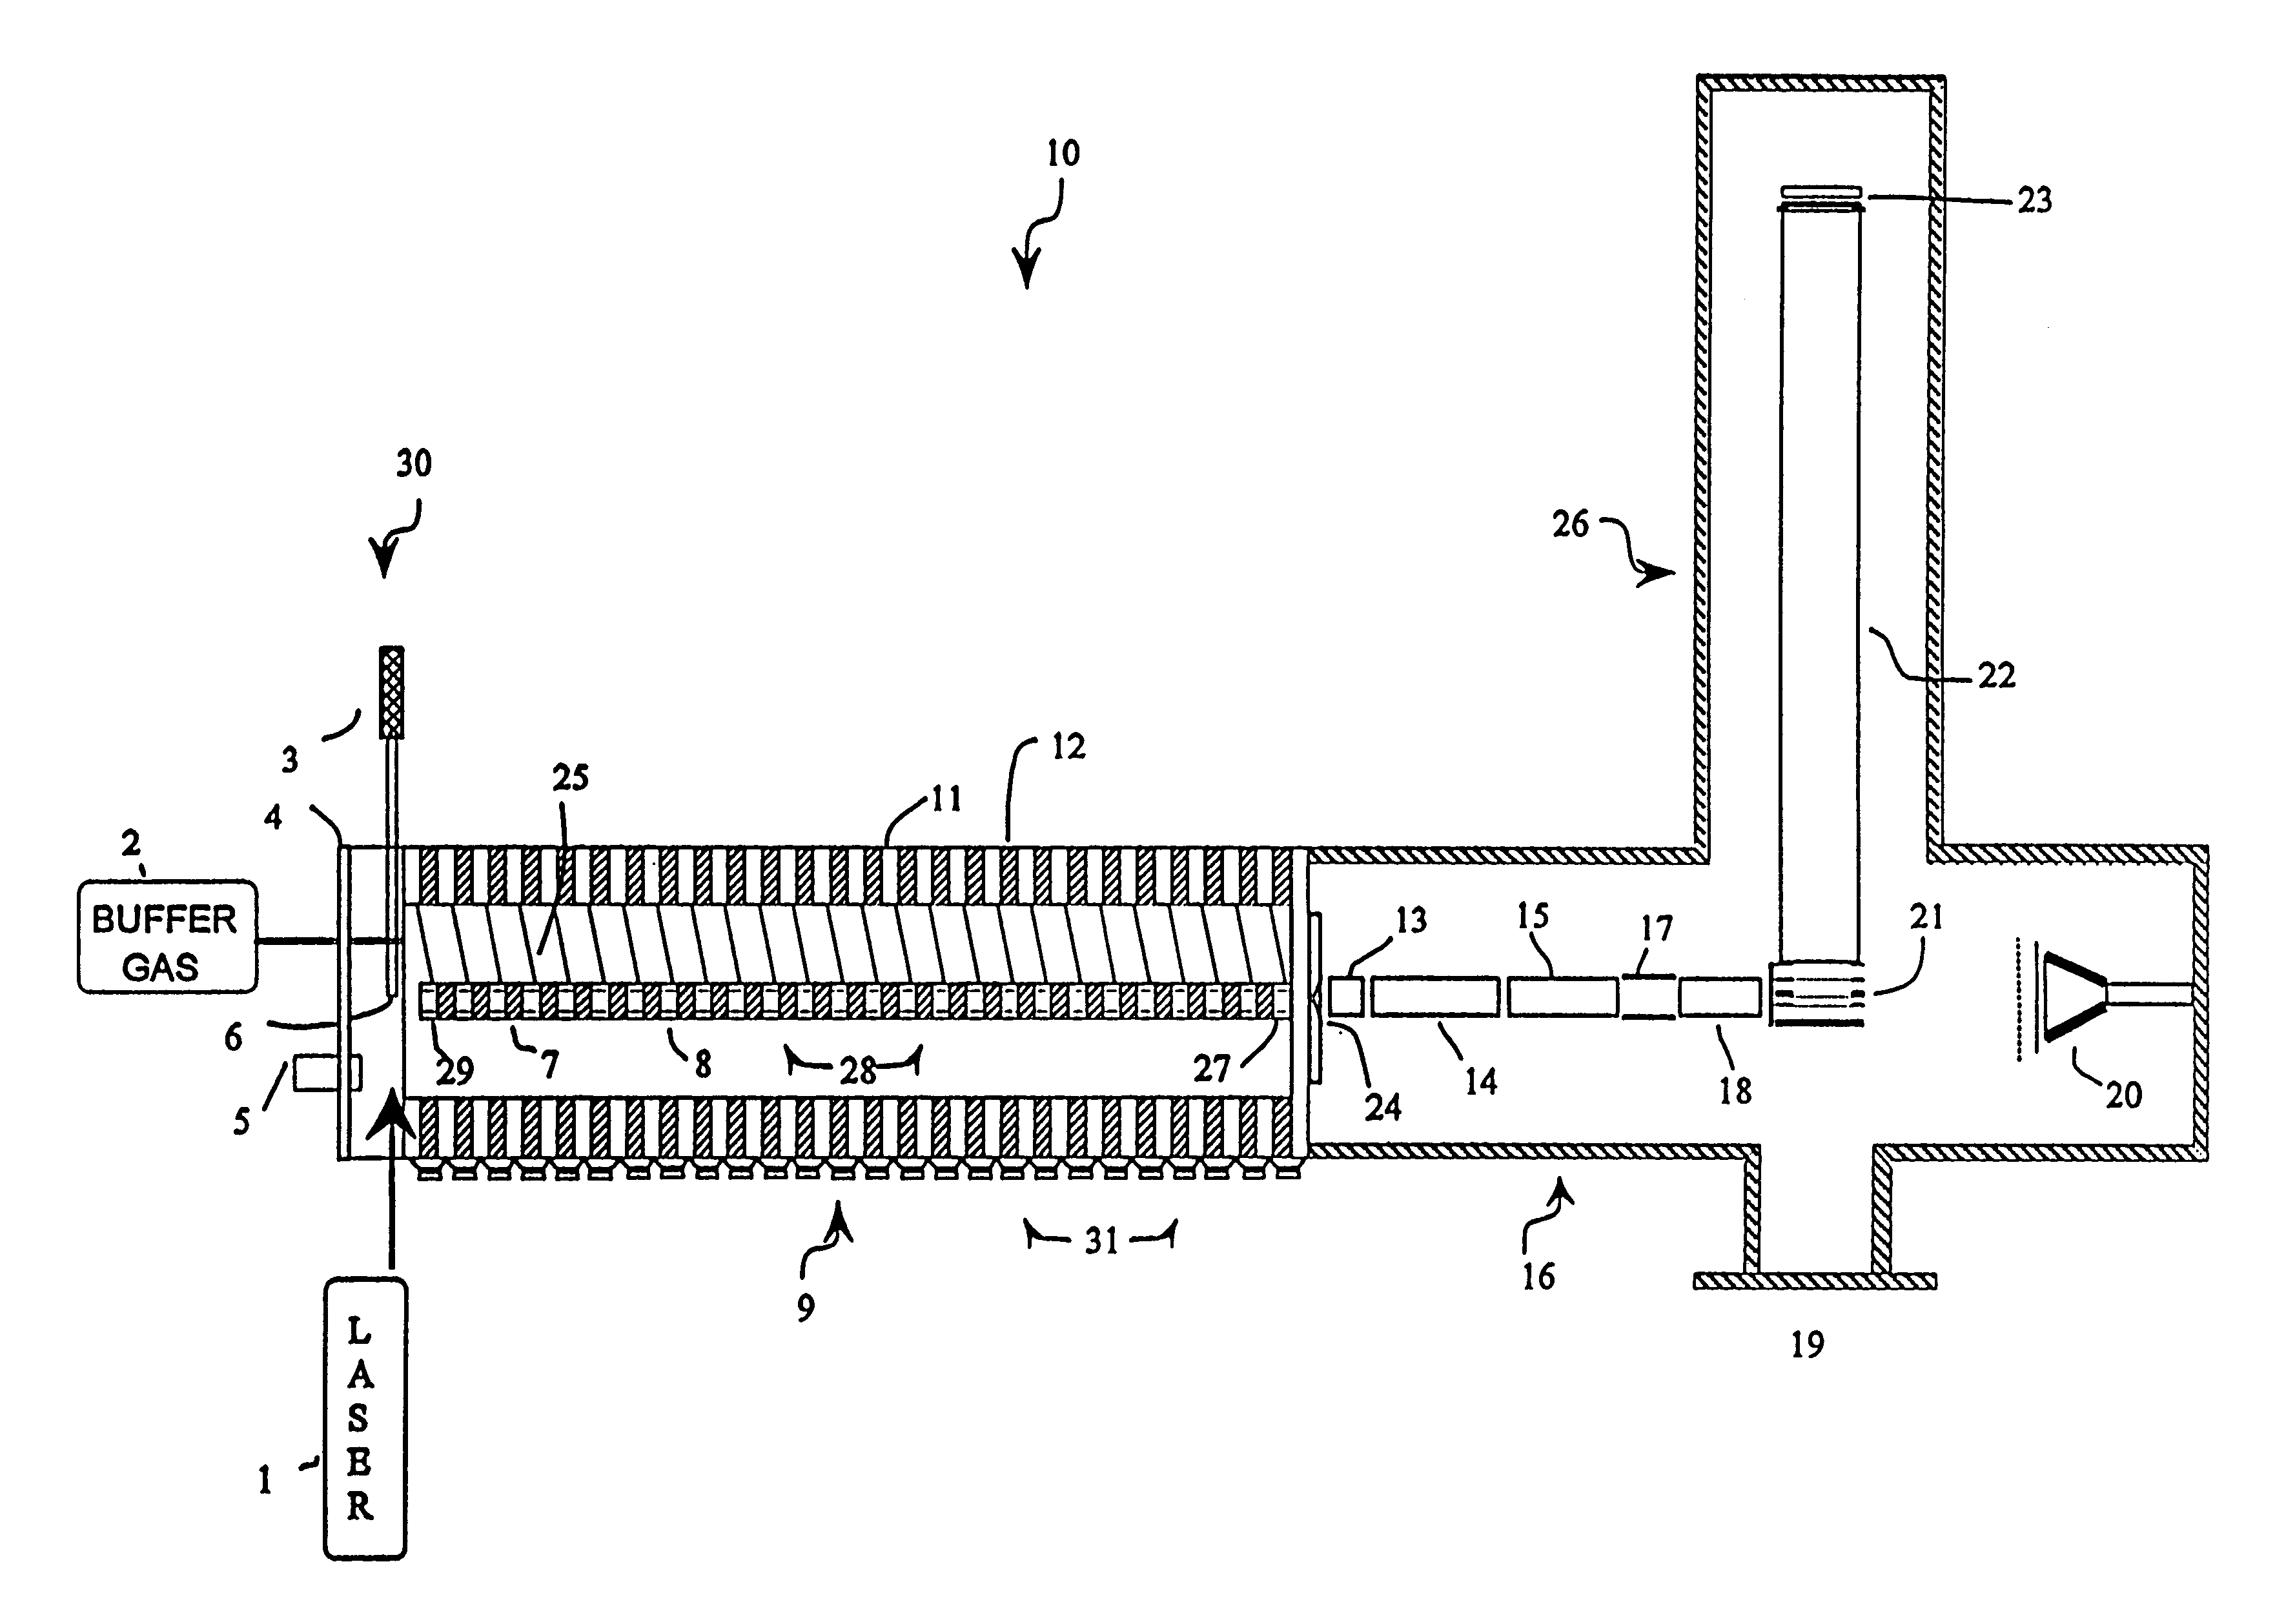 Periodic field focusing ion mobility spectrometer